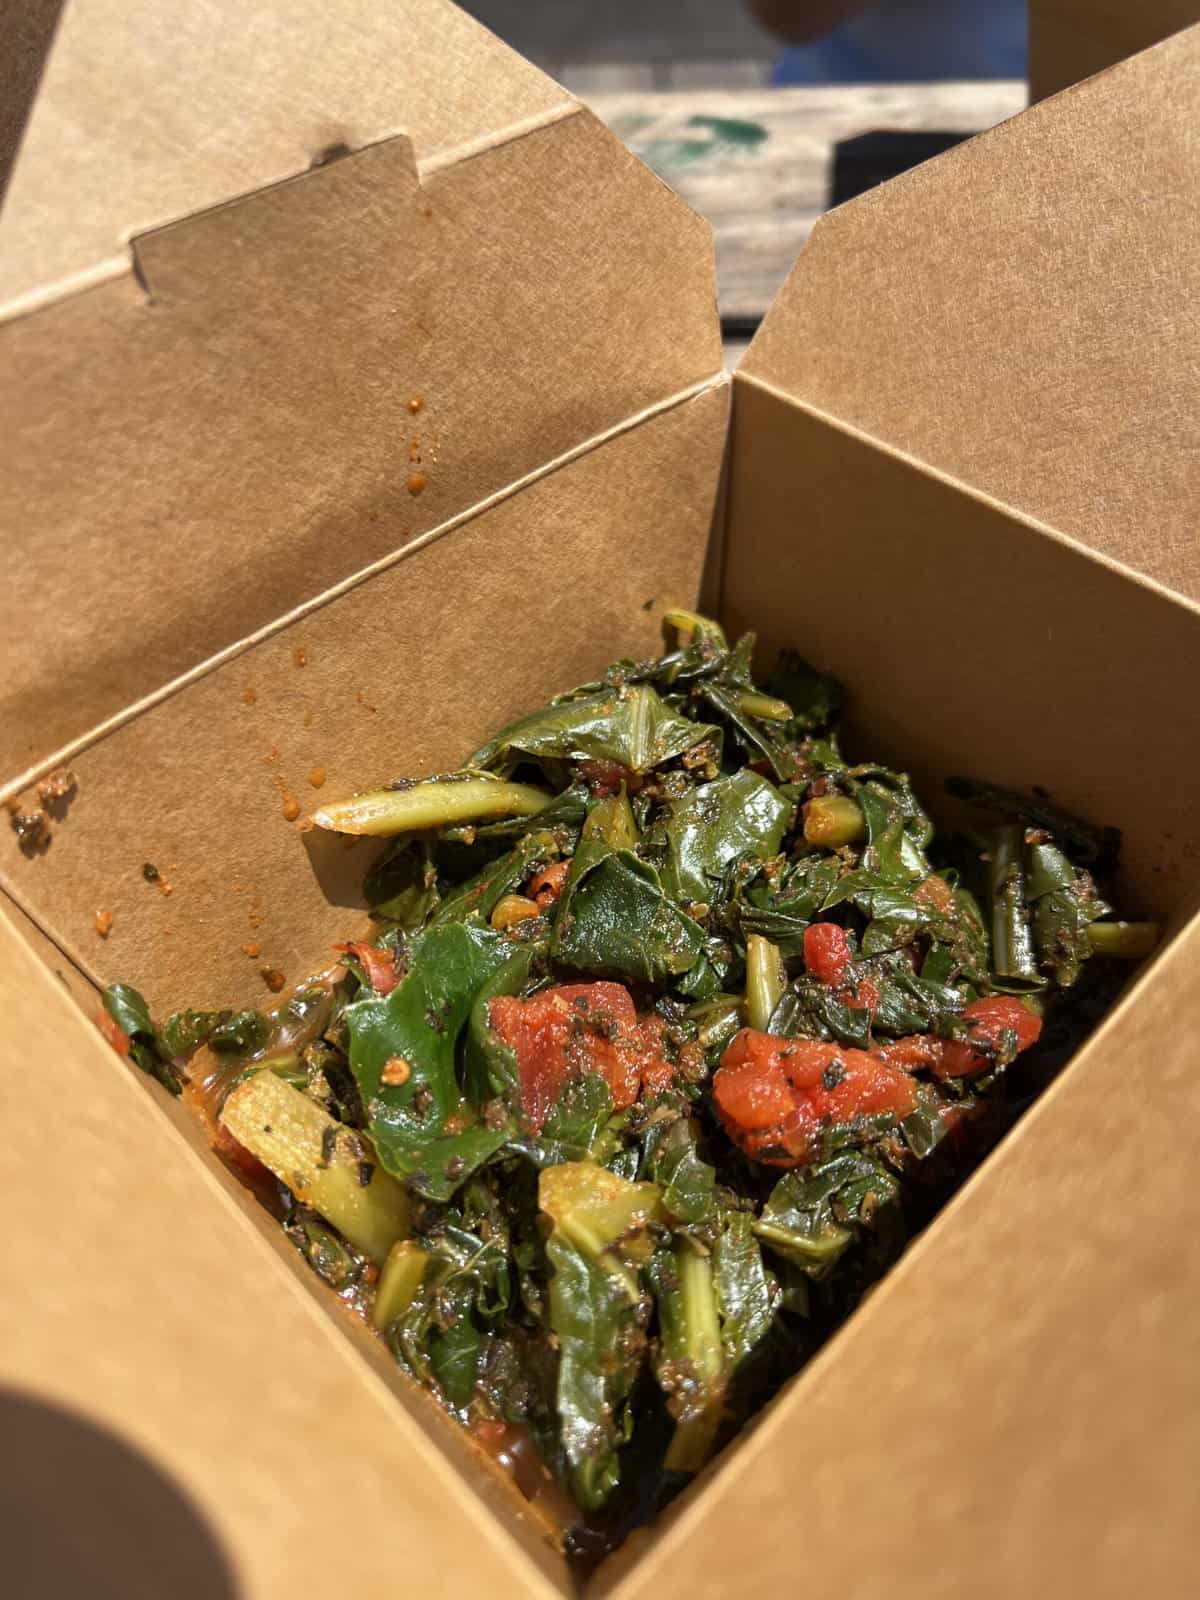 greens from Souley Vegan in Oakland, CA